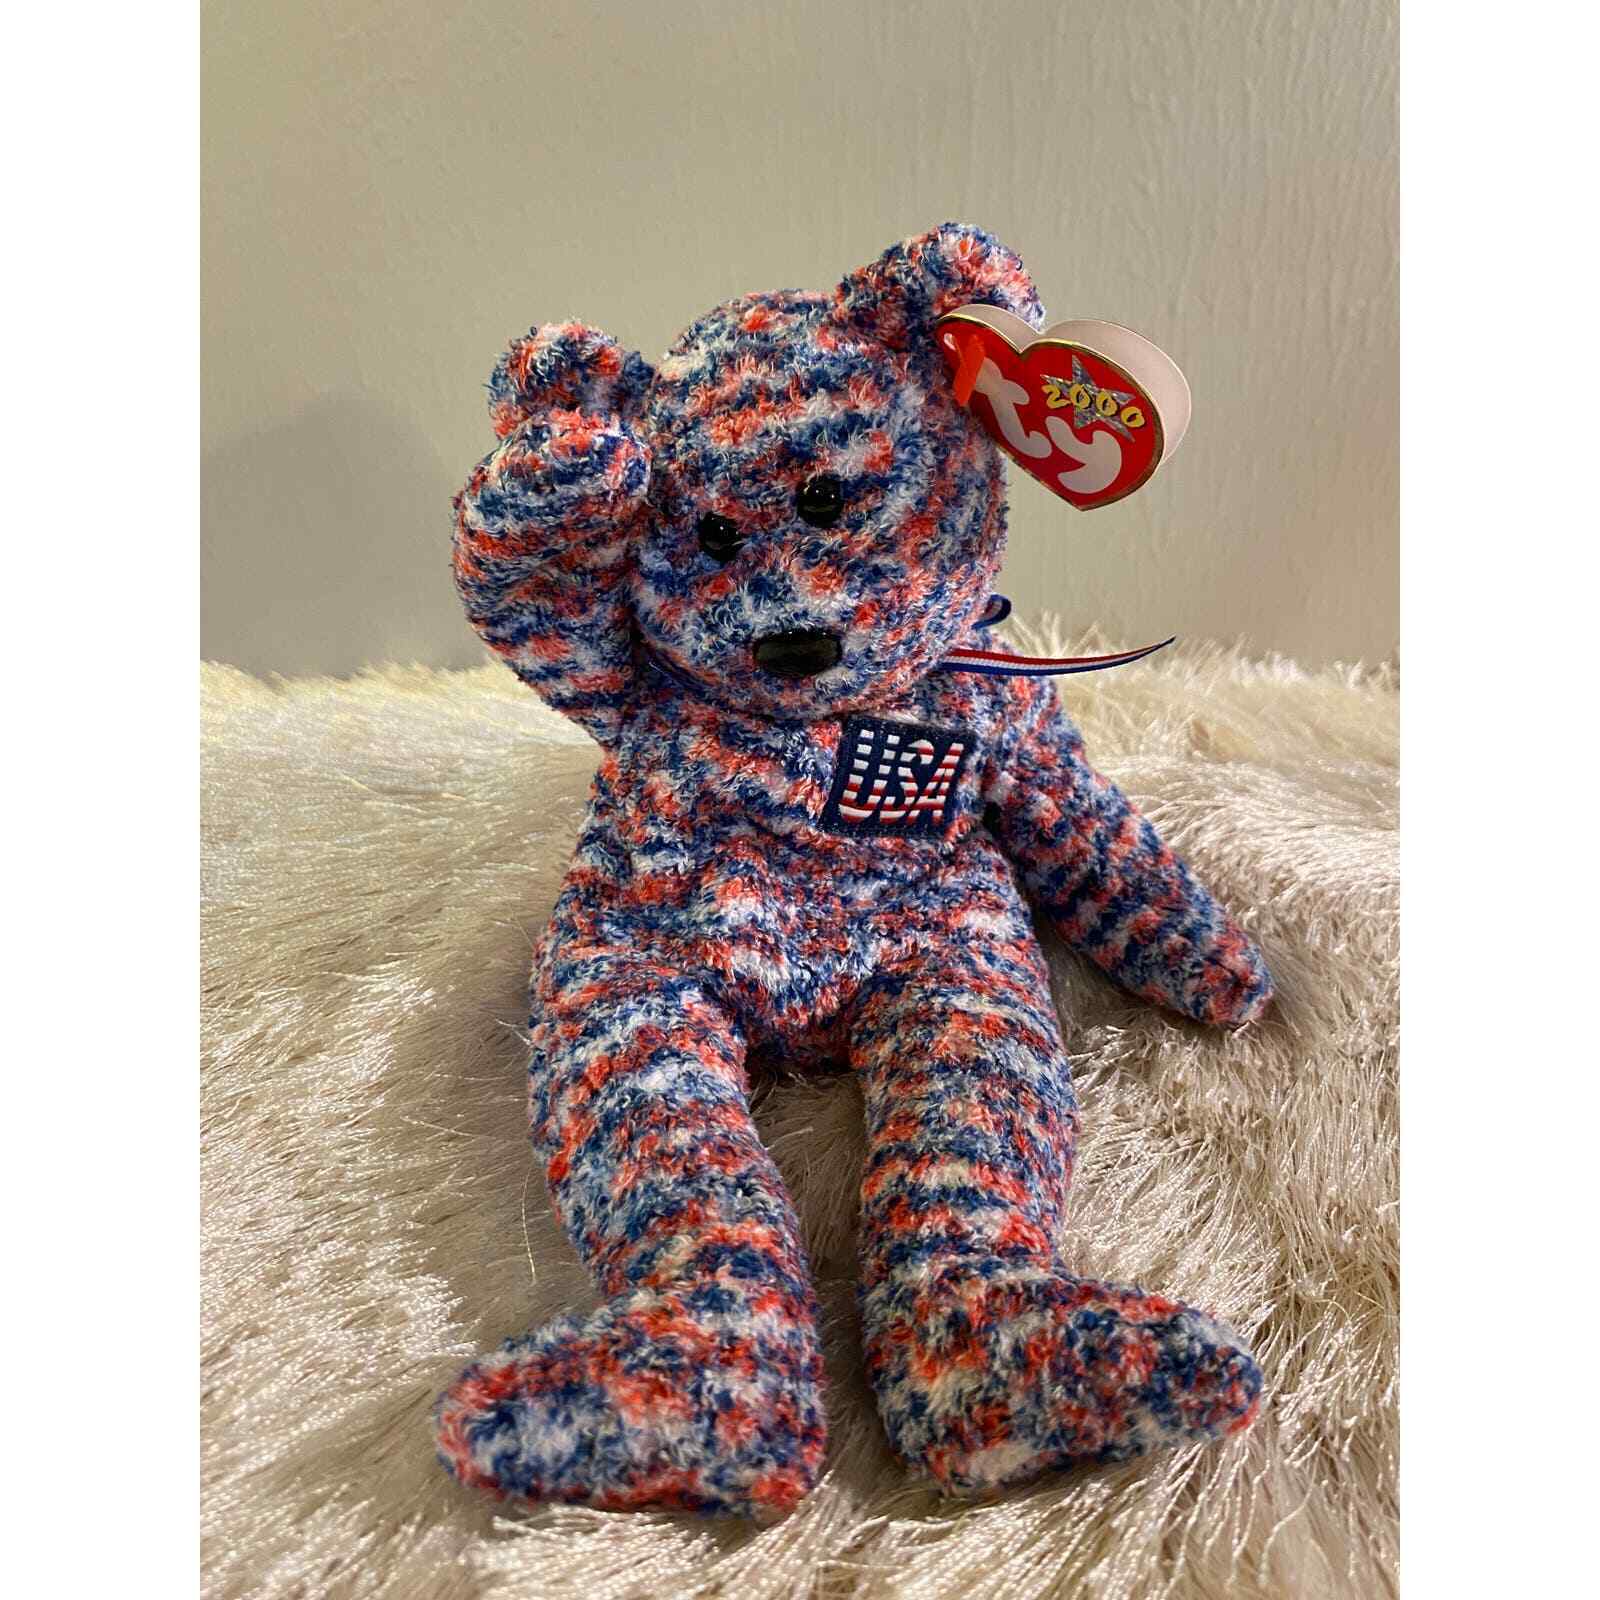 USA 🇺🇸 Ty Beanie Baby MINT with mint tags Grammatical ERRORS 🇺🇸